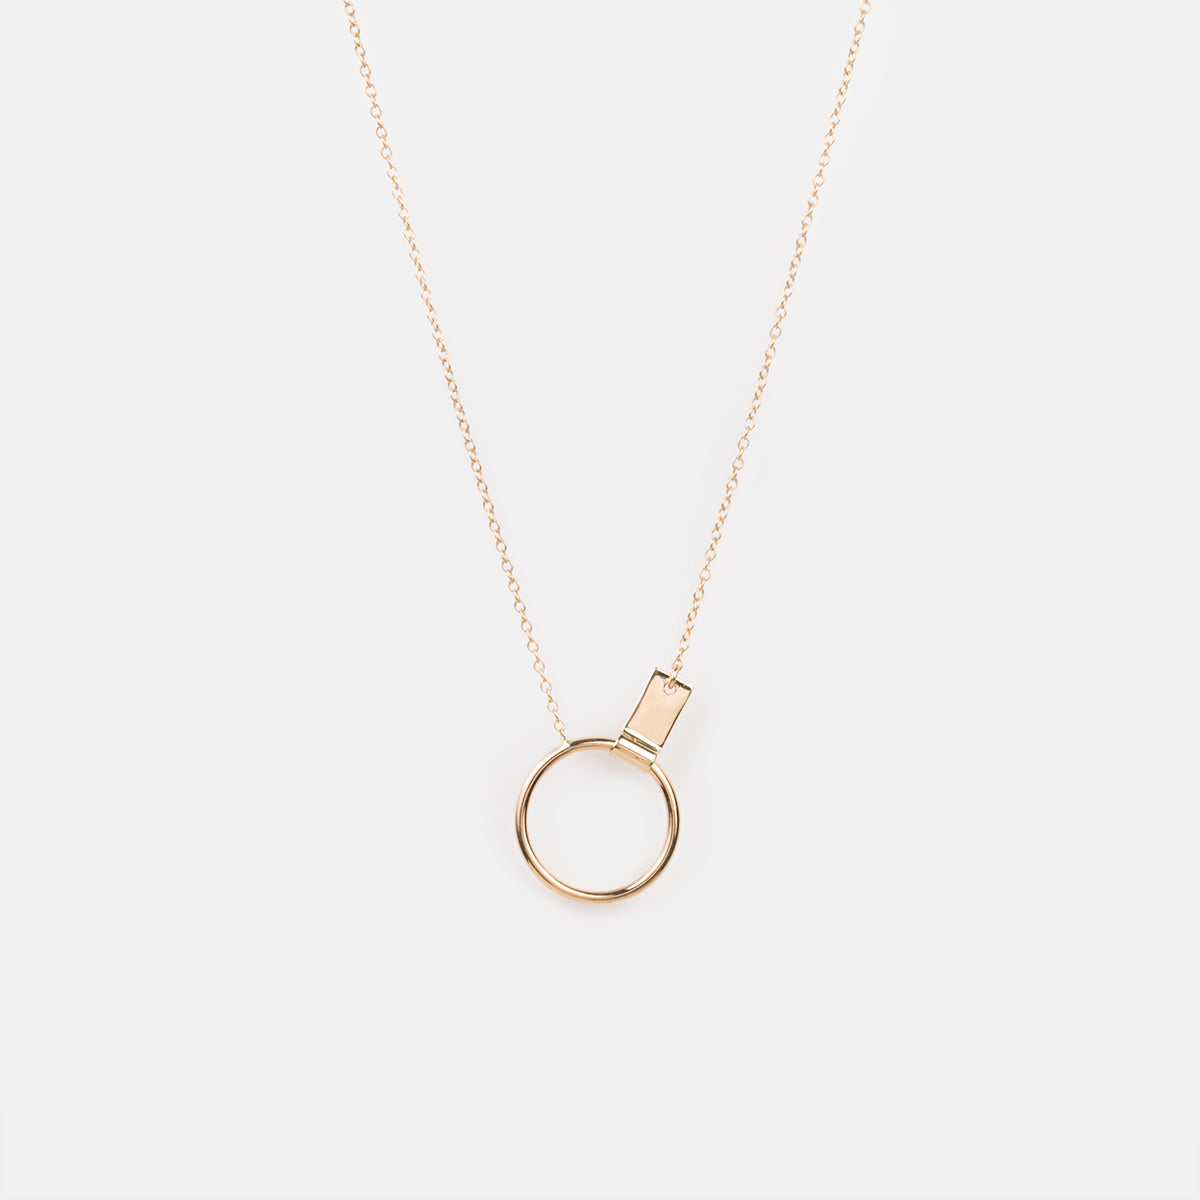 Vasara Simple Necklace in 14k Gold By SHW Fine Jewelry NYC